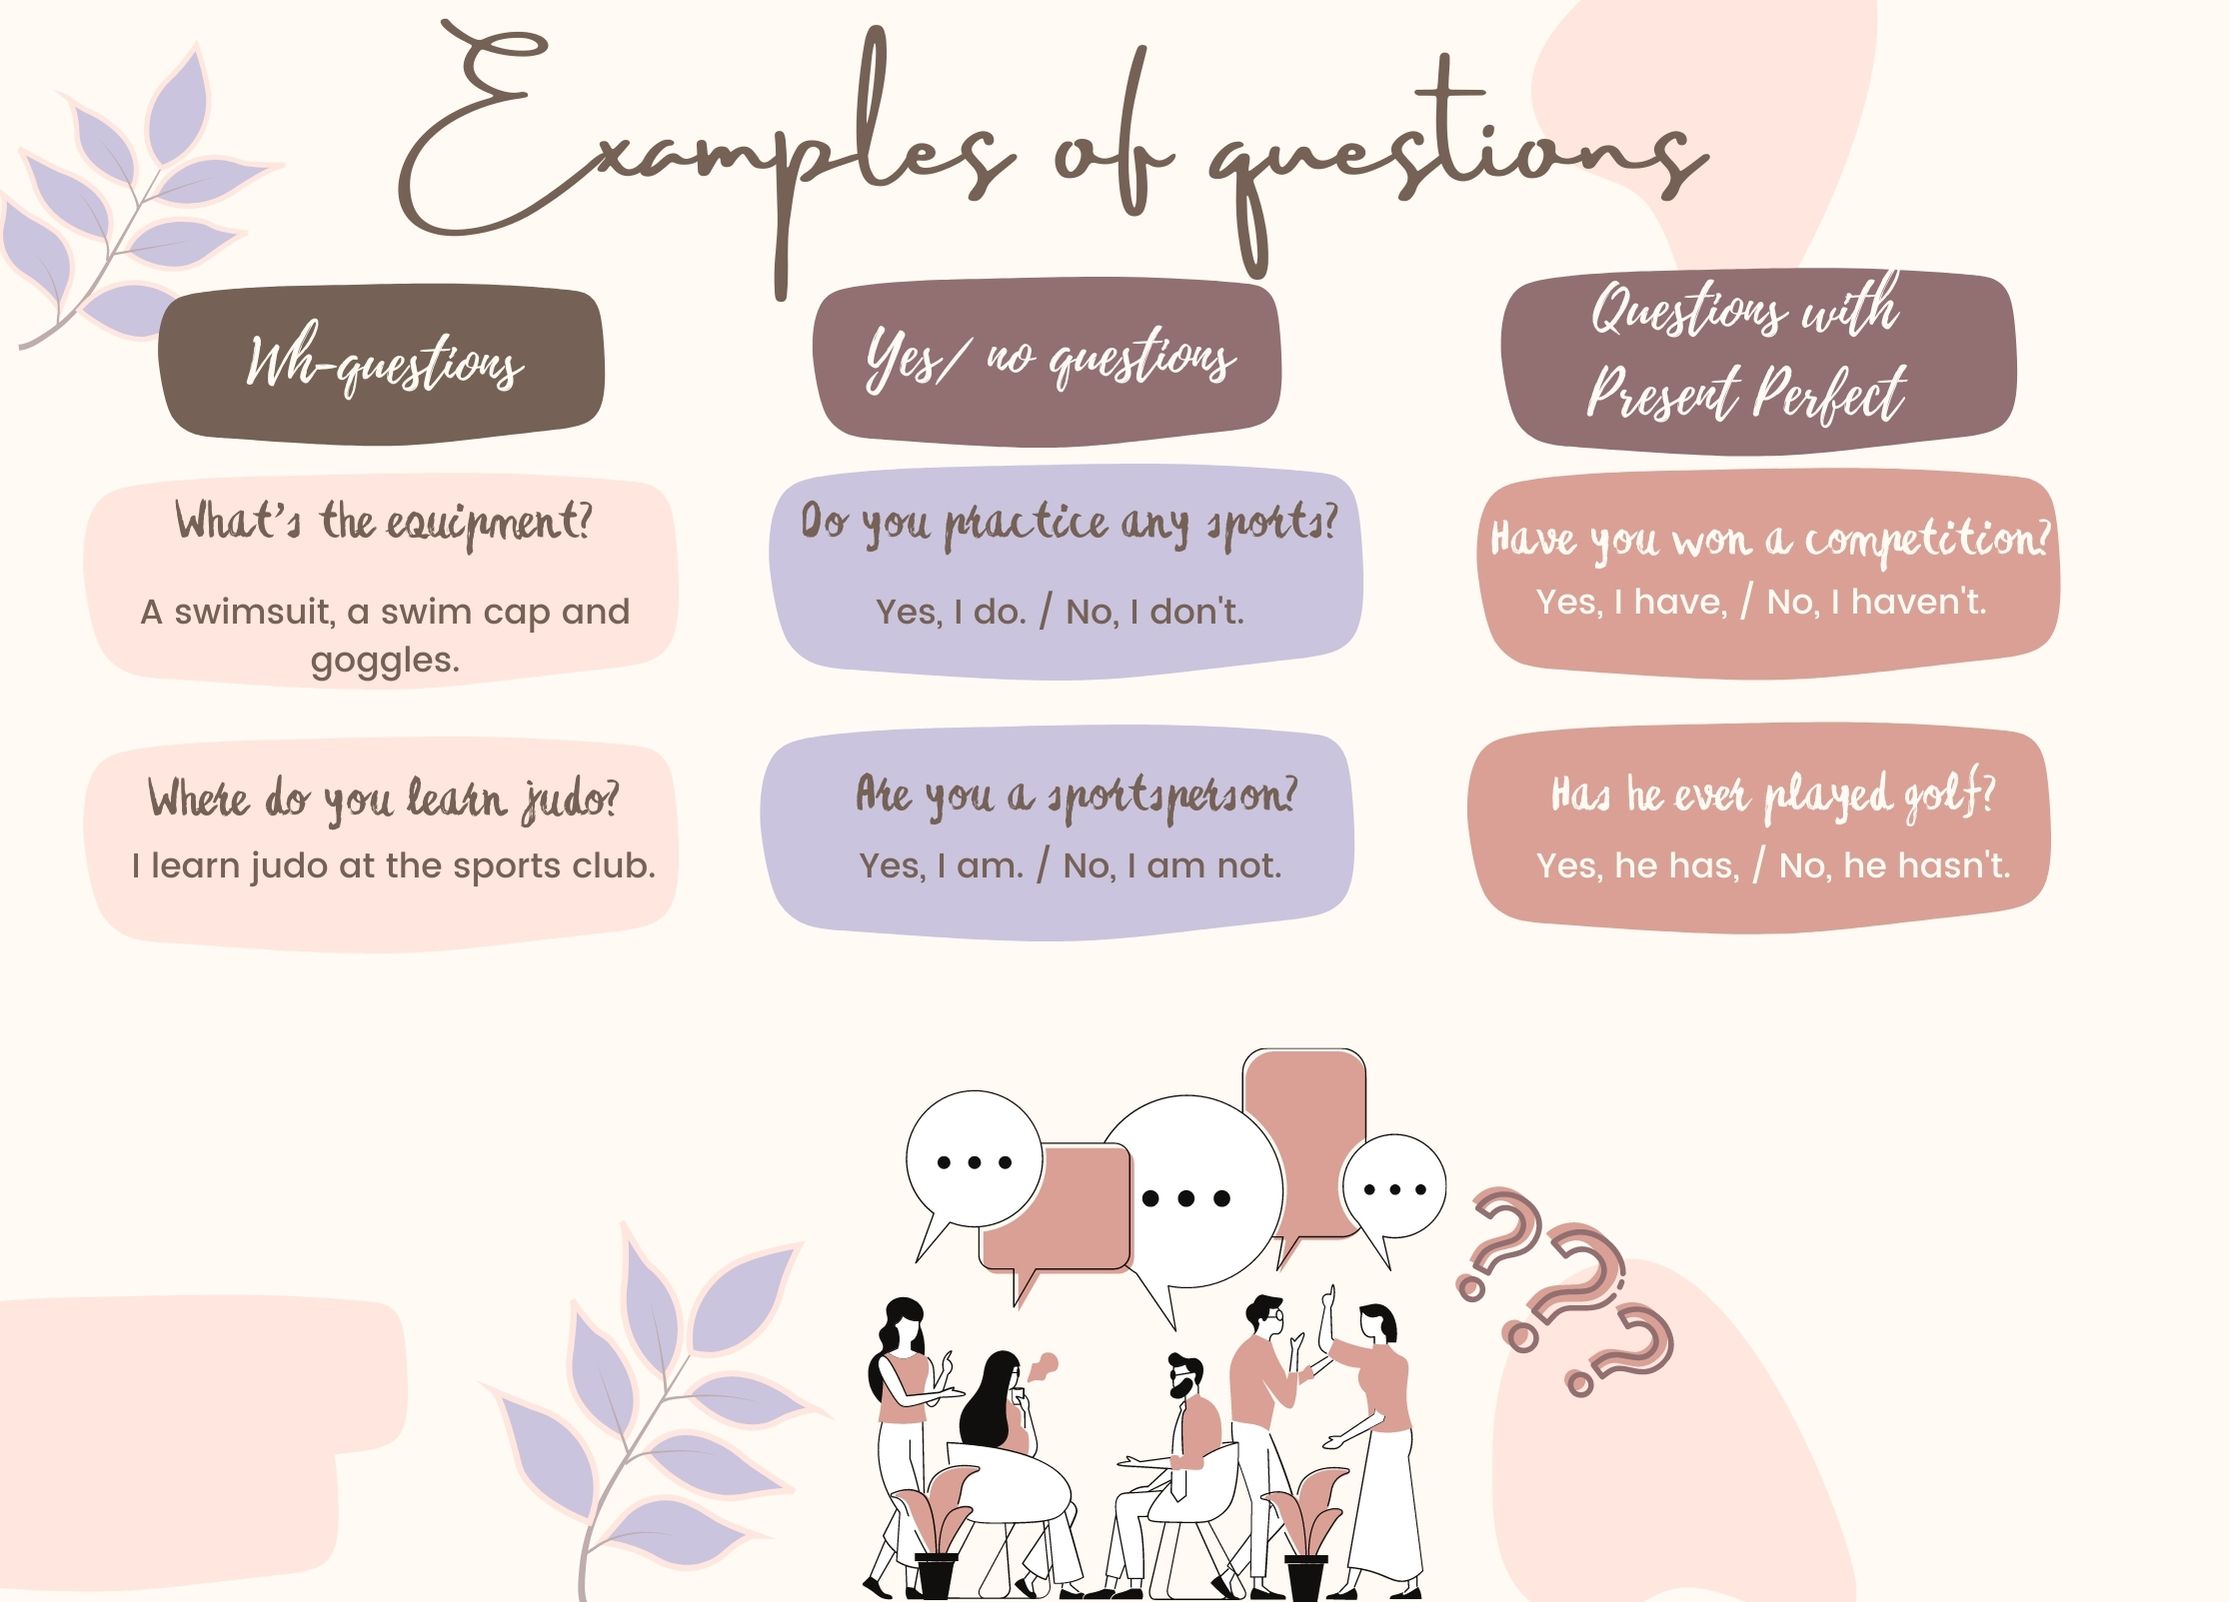 Examples of questions